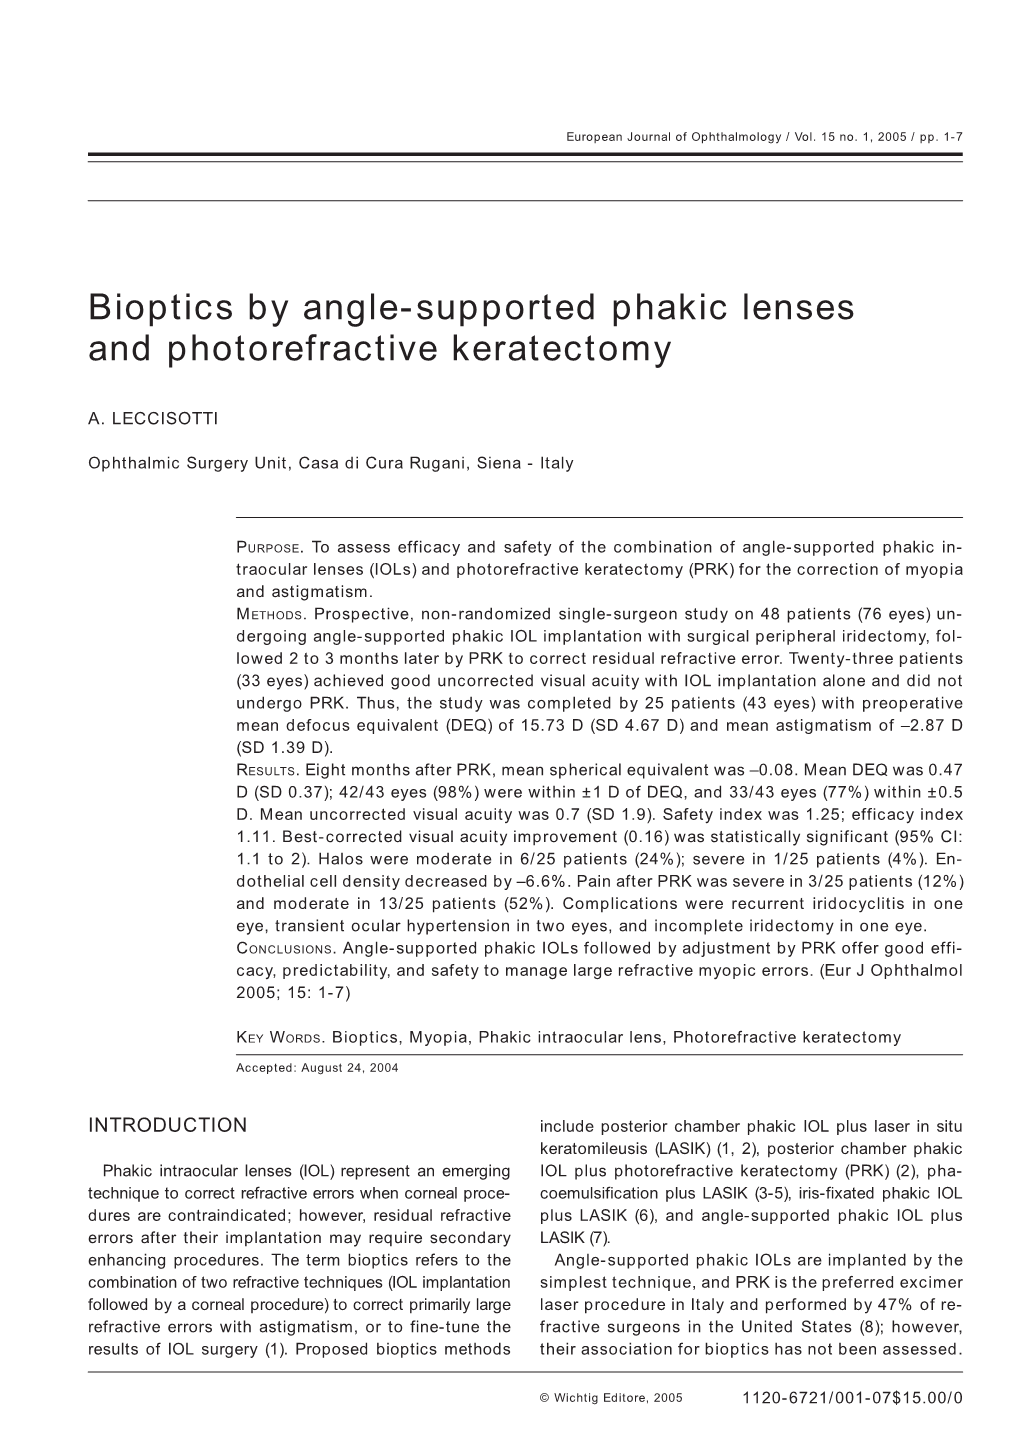 Bioptics by Angle-Supported Phakic Lenses and Photorefractive Keratectomy